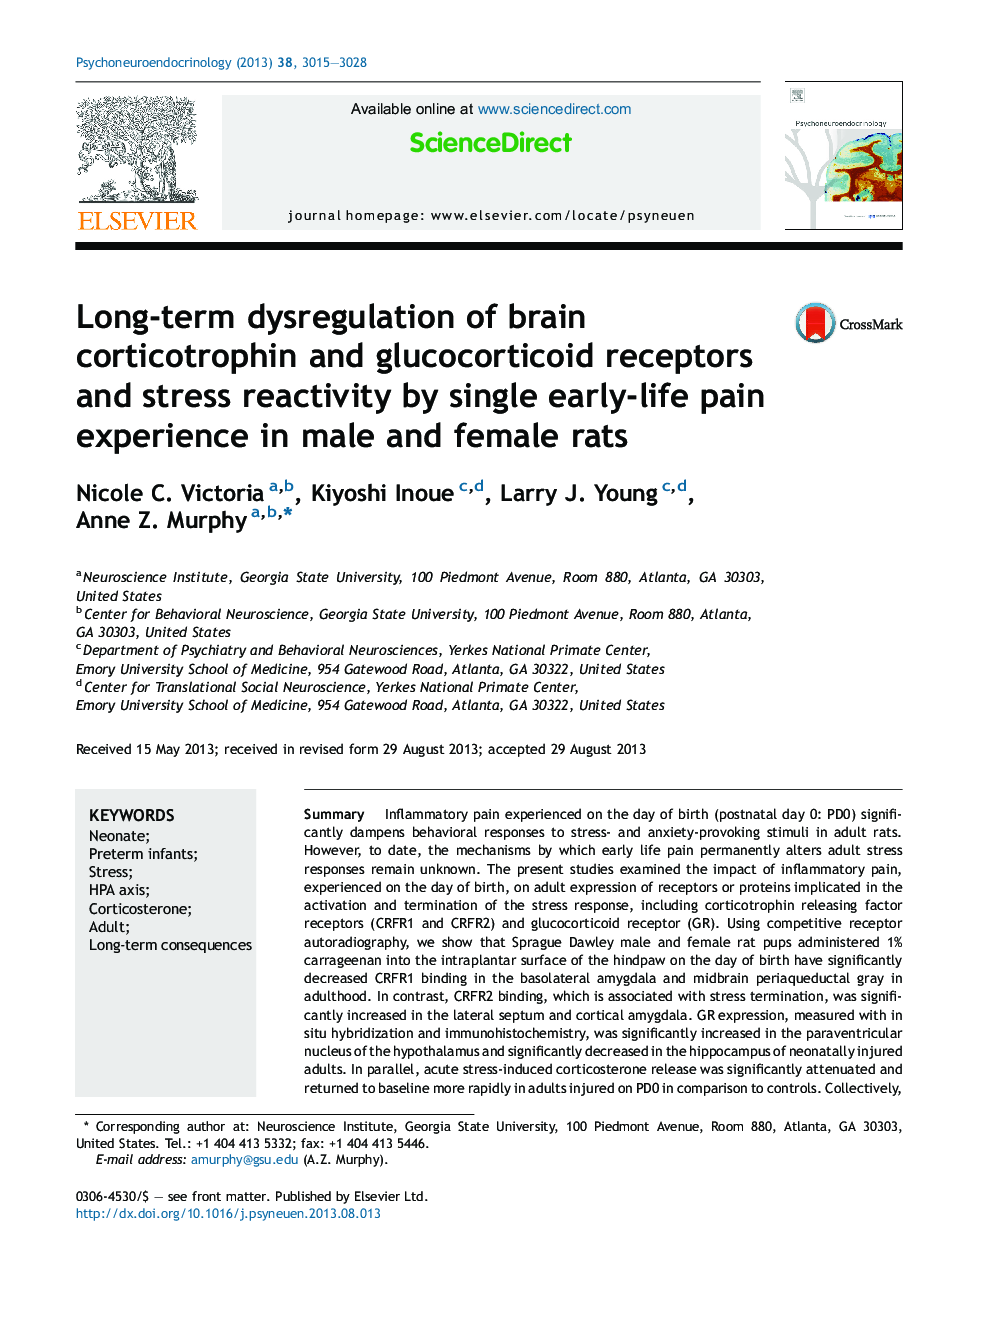 Long-term dysregulation of brain corticotrophin and glucocorticoid receptors and stress reactivity by single early-life pain experience in male and female rats